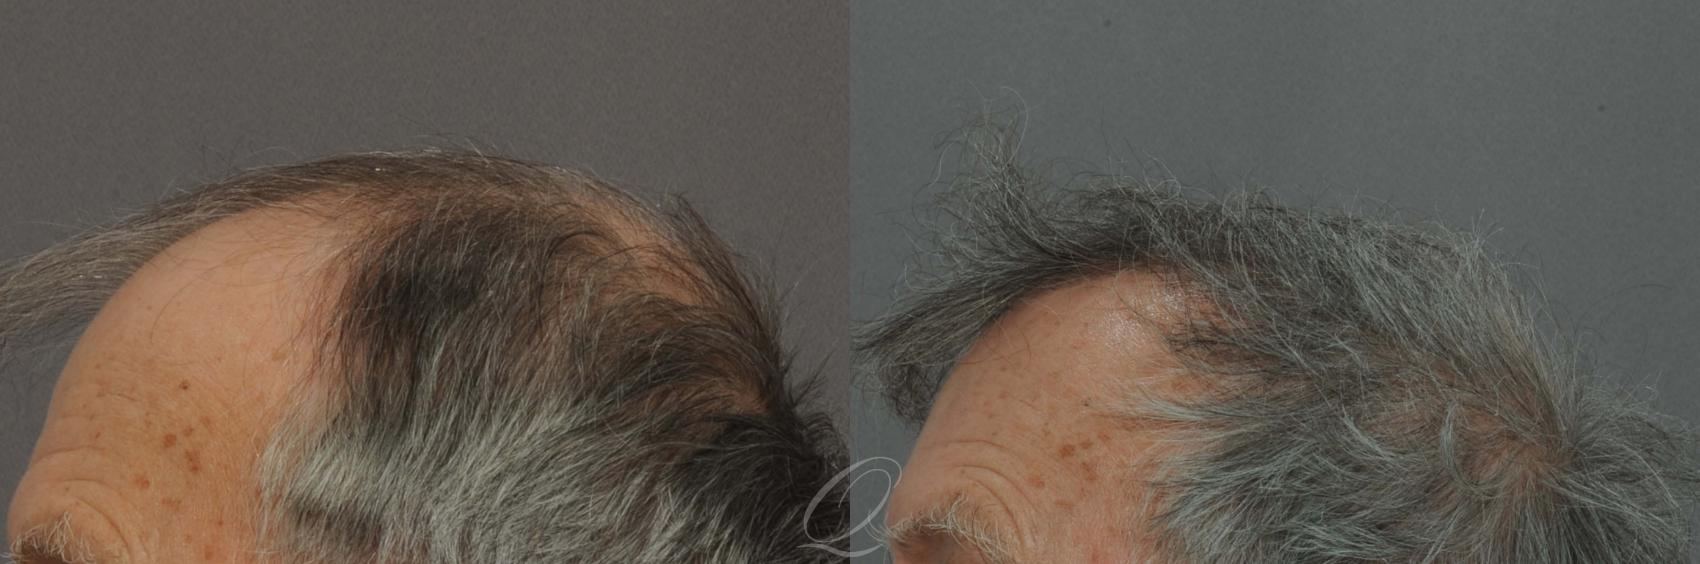 FUT Case 1026 Before & After View #2 | Rochester, Buffalo, & Syracuse, NY | Quatela Center for Hair Restoration